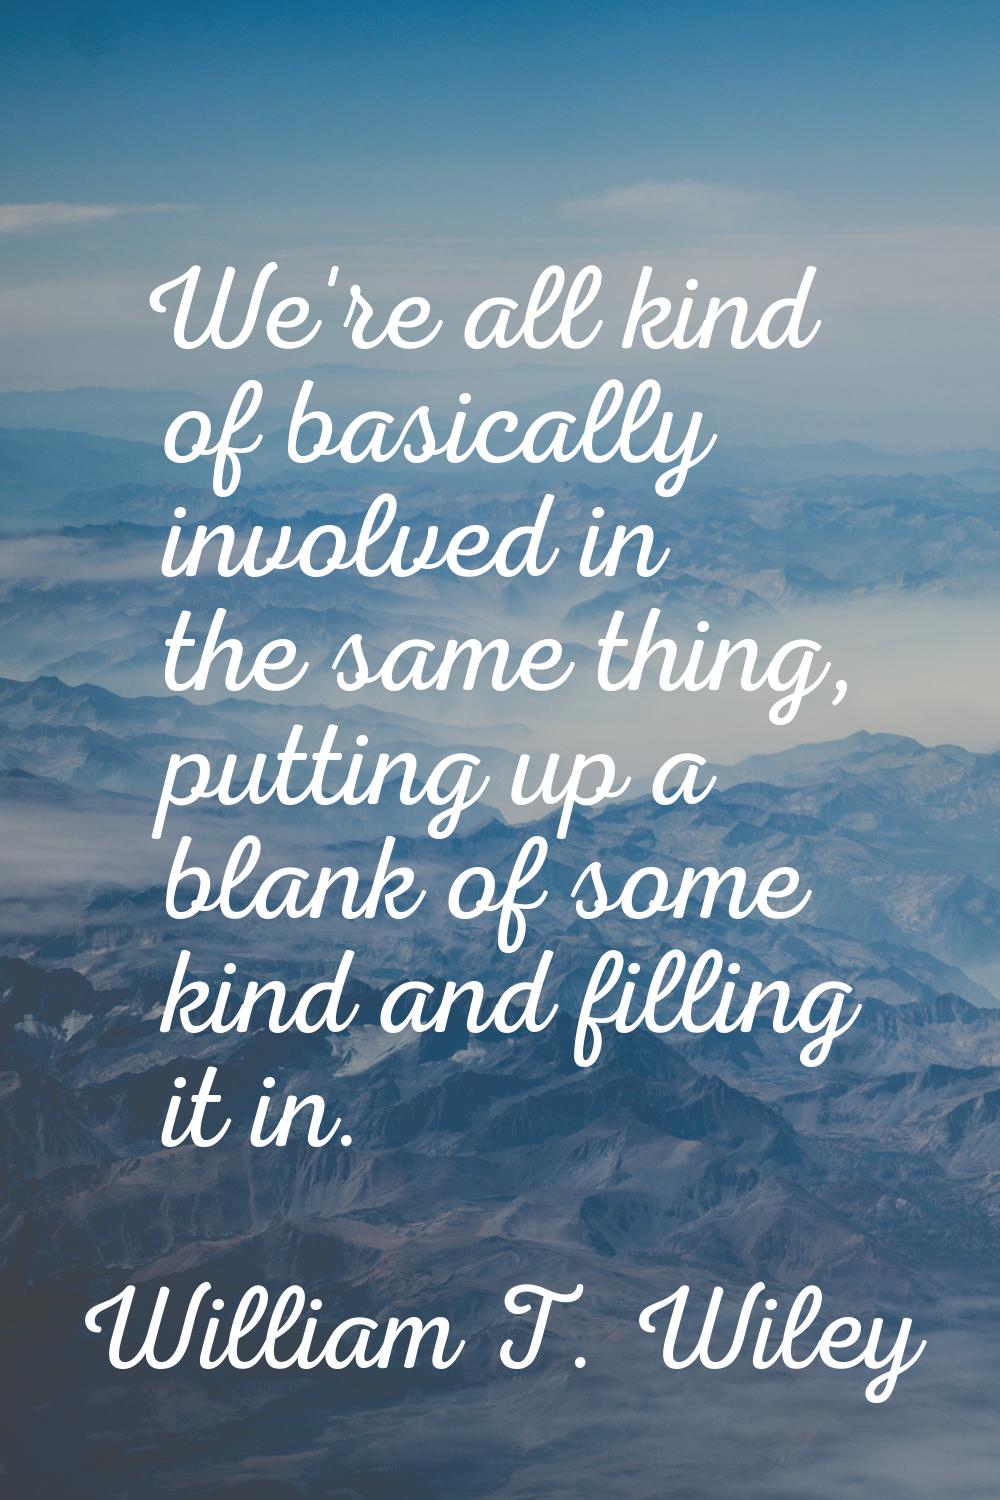 We're all kind of basically involved in the same thing, putting up a blank of some kind and filling